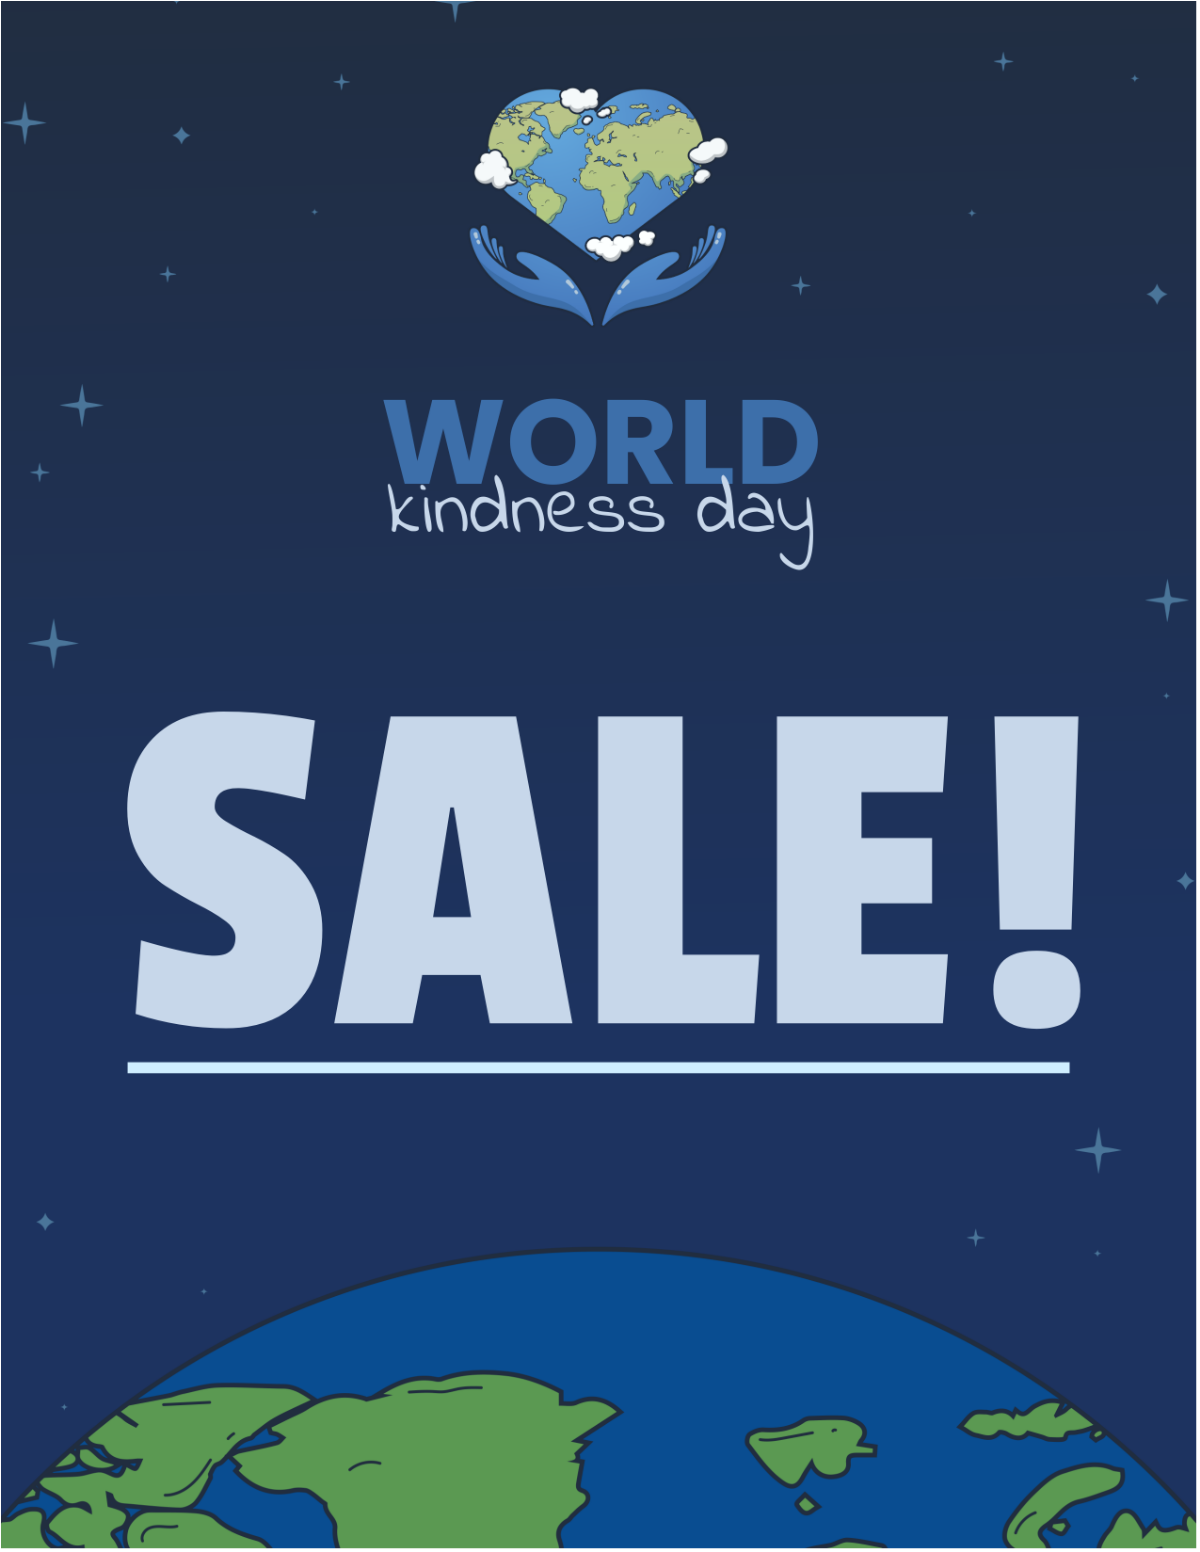 Free World Kindness Day Sales Flyer Template